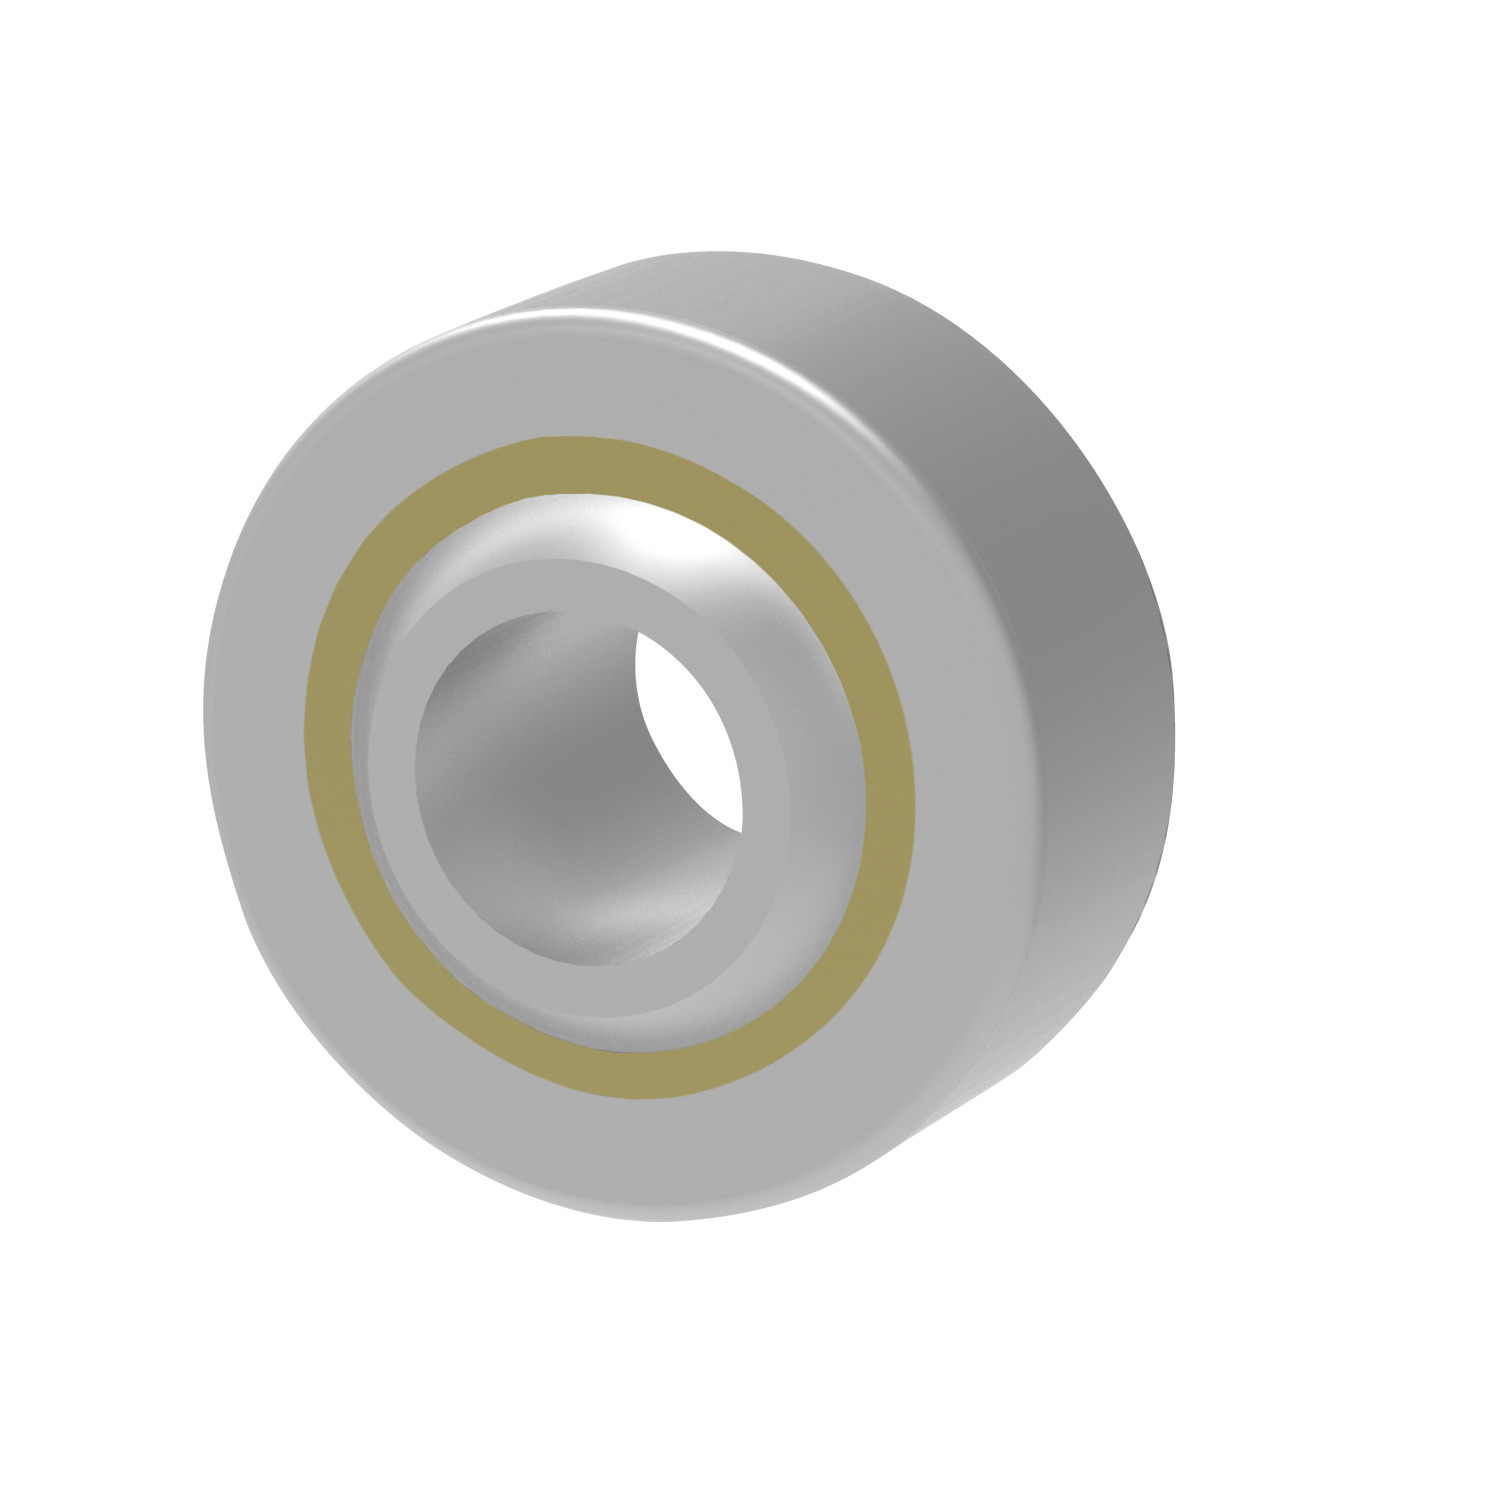 Spherical Plain Bearings Spherical bearings are machined to DIN 12240-1, suitable for low speeds and high dynamic loads. For stainless versions see 65976.